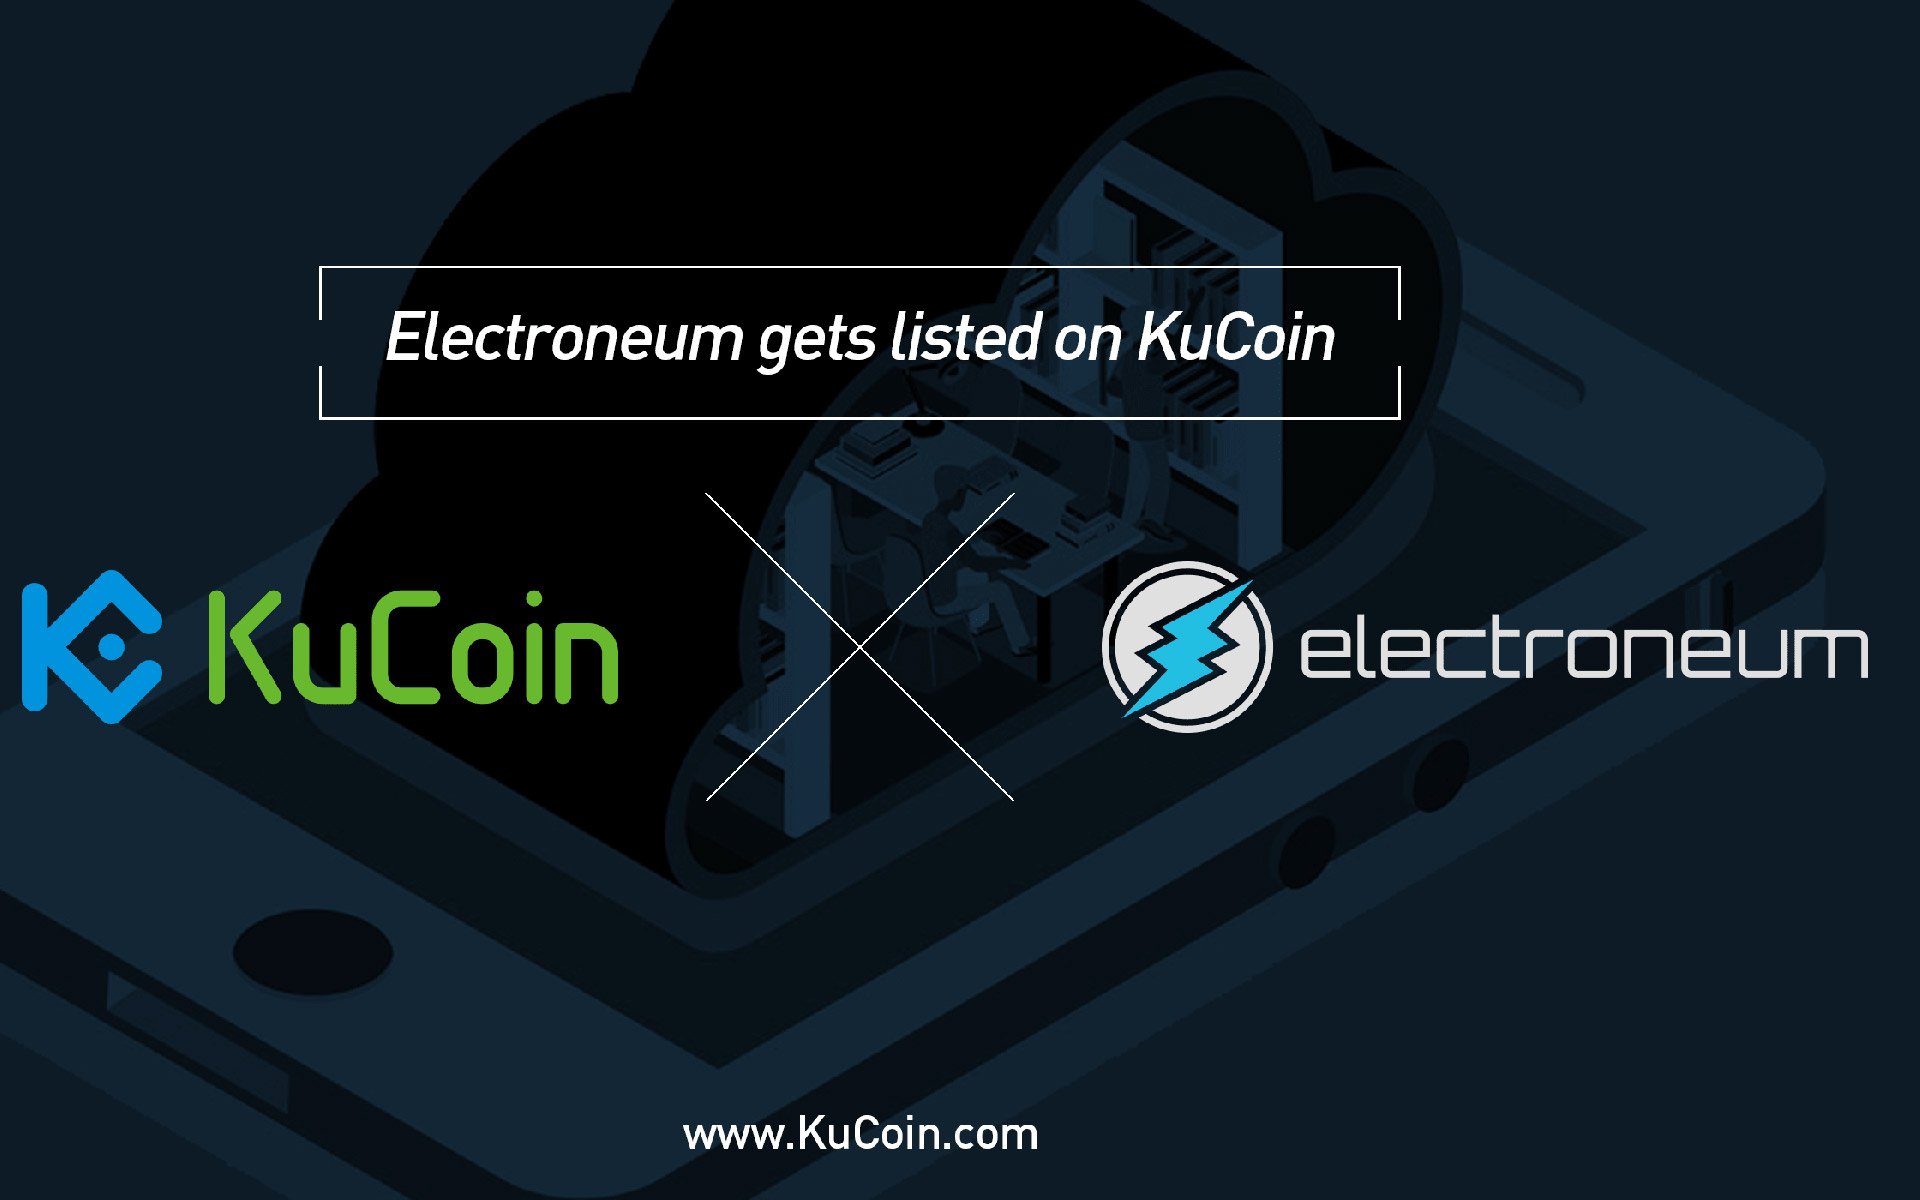 Electroneum (ETN) Gets Listed On KuCoin